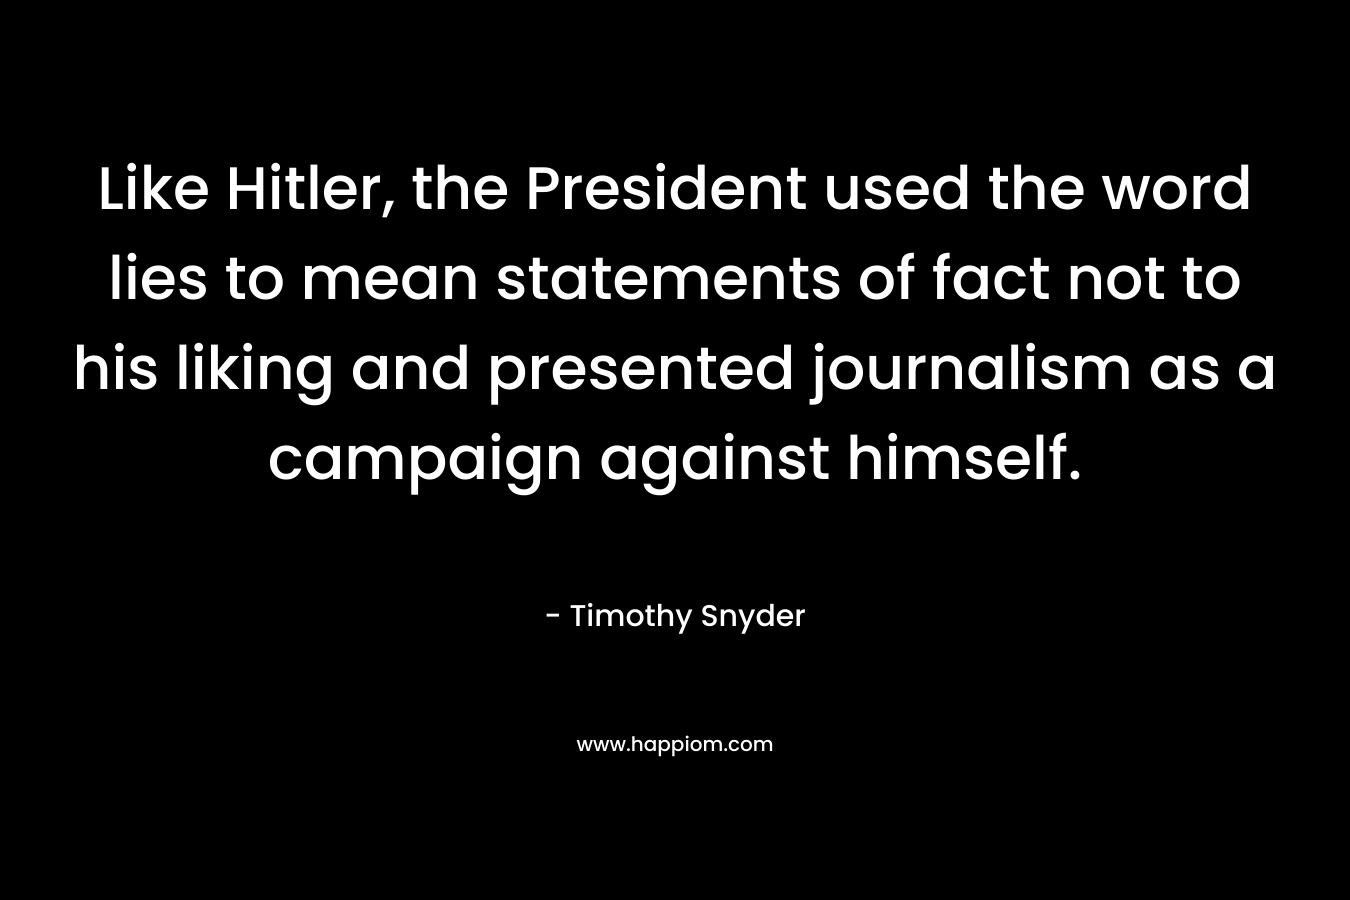 Like Hitler, the President used the word lies to mean statements of fact not to his liking and presented journalism as a campaign against himself. – Timothy Snyder